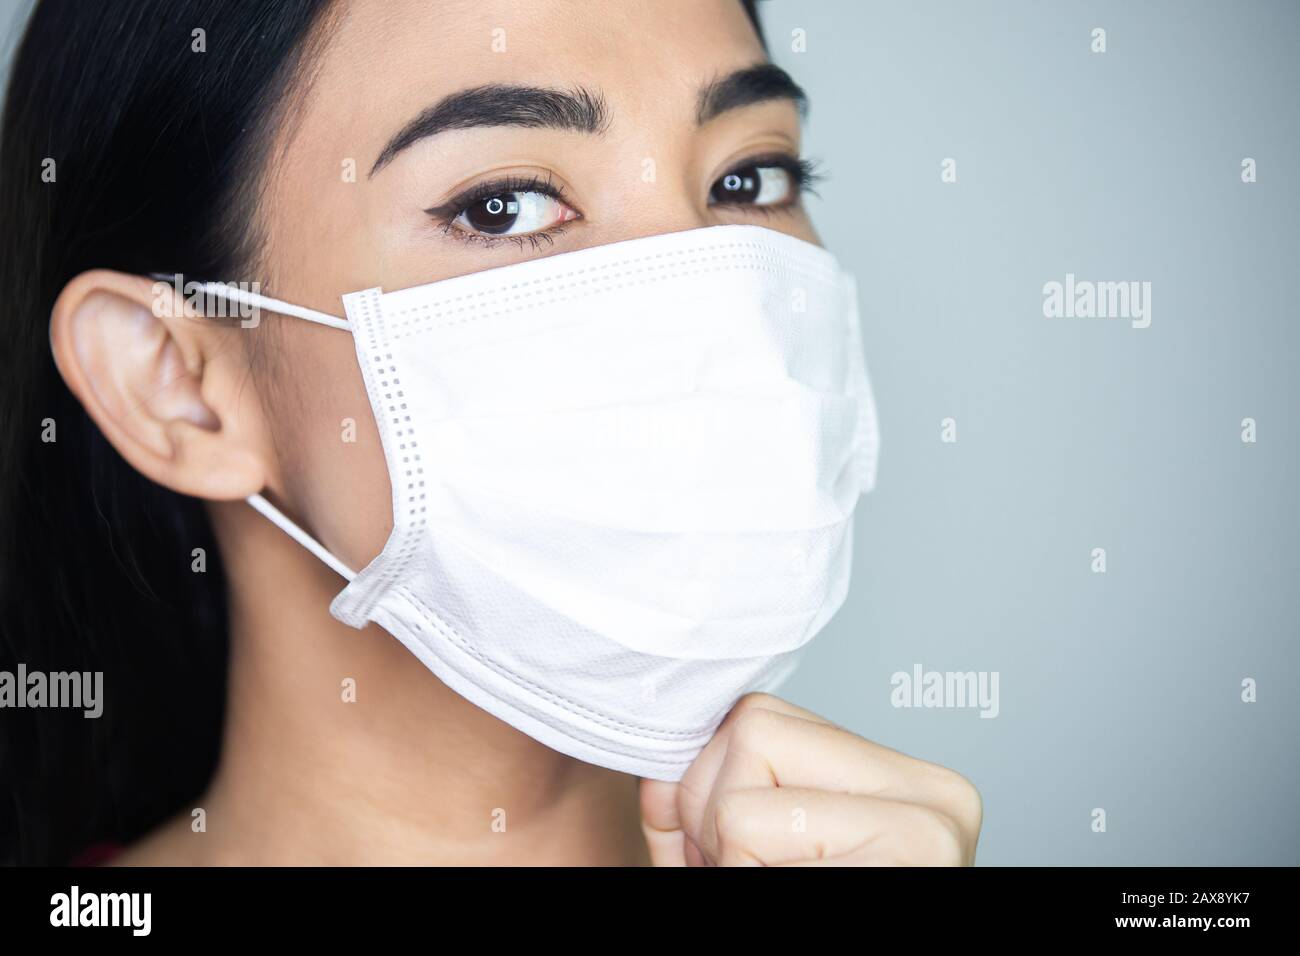 A woman wearing medical disposable mask to avoid contagious viruses. Stock Photo